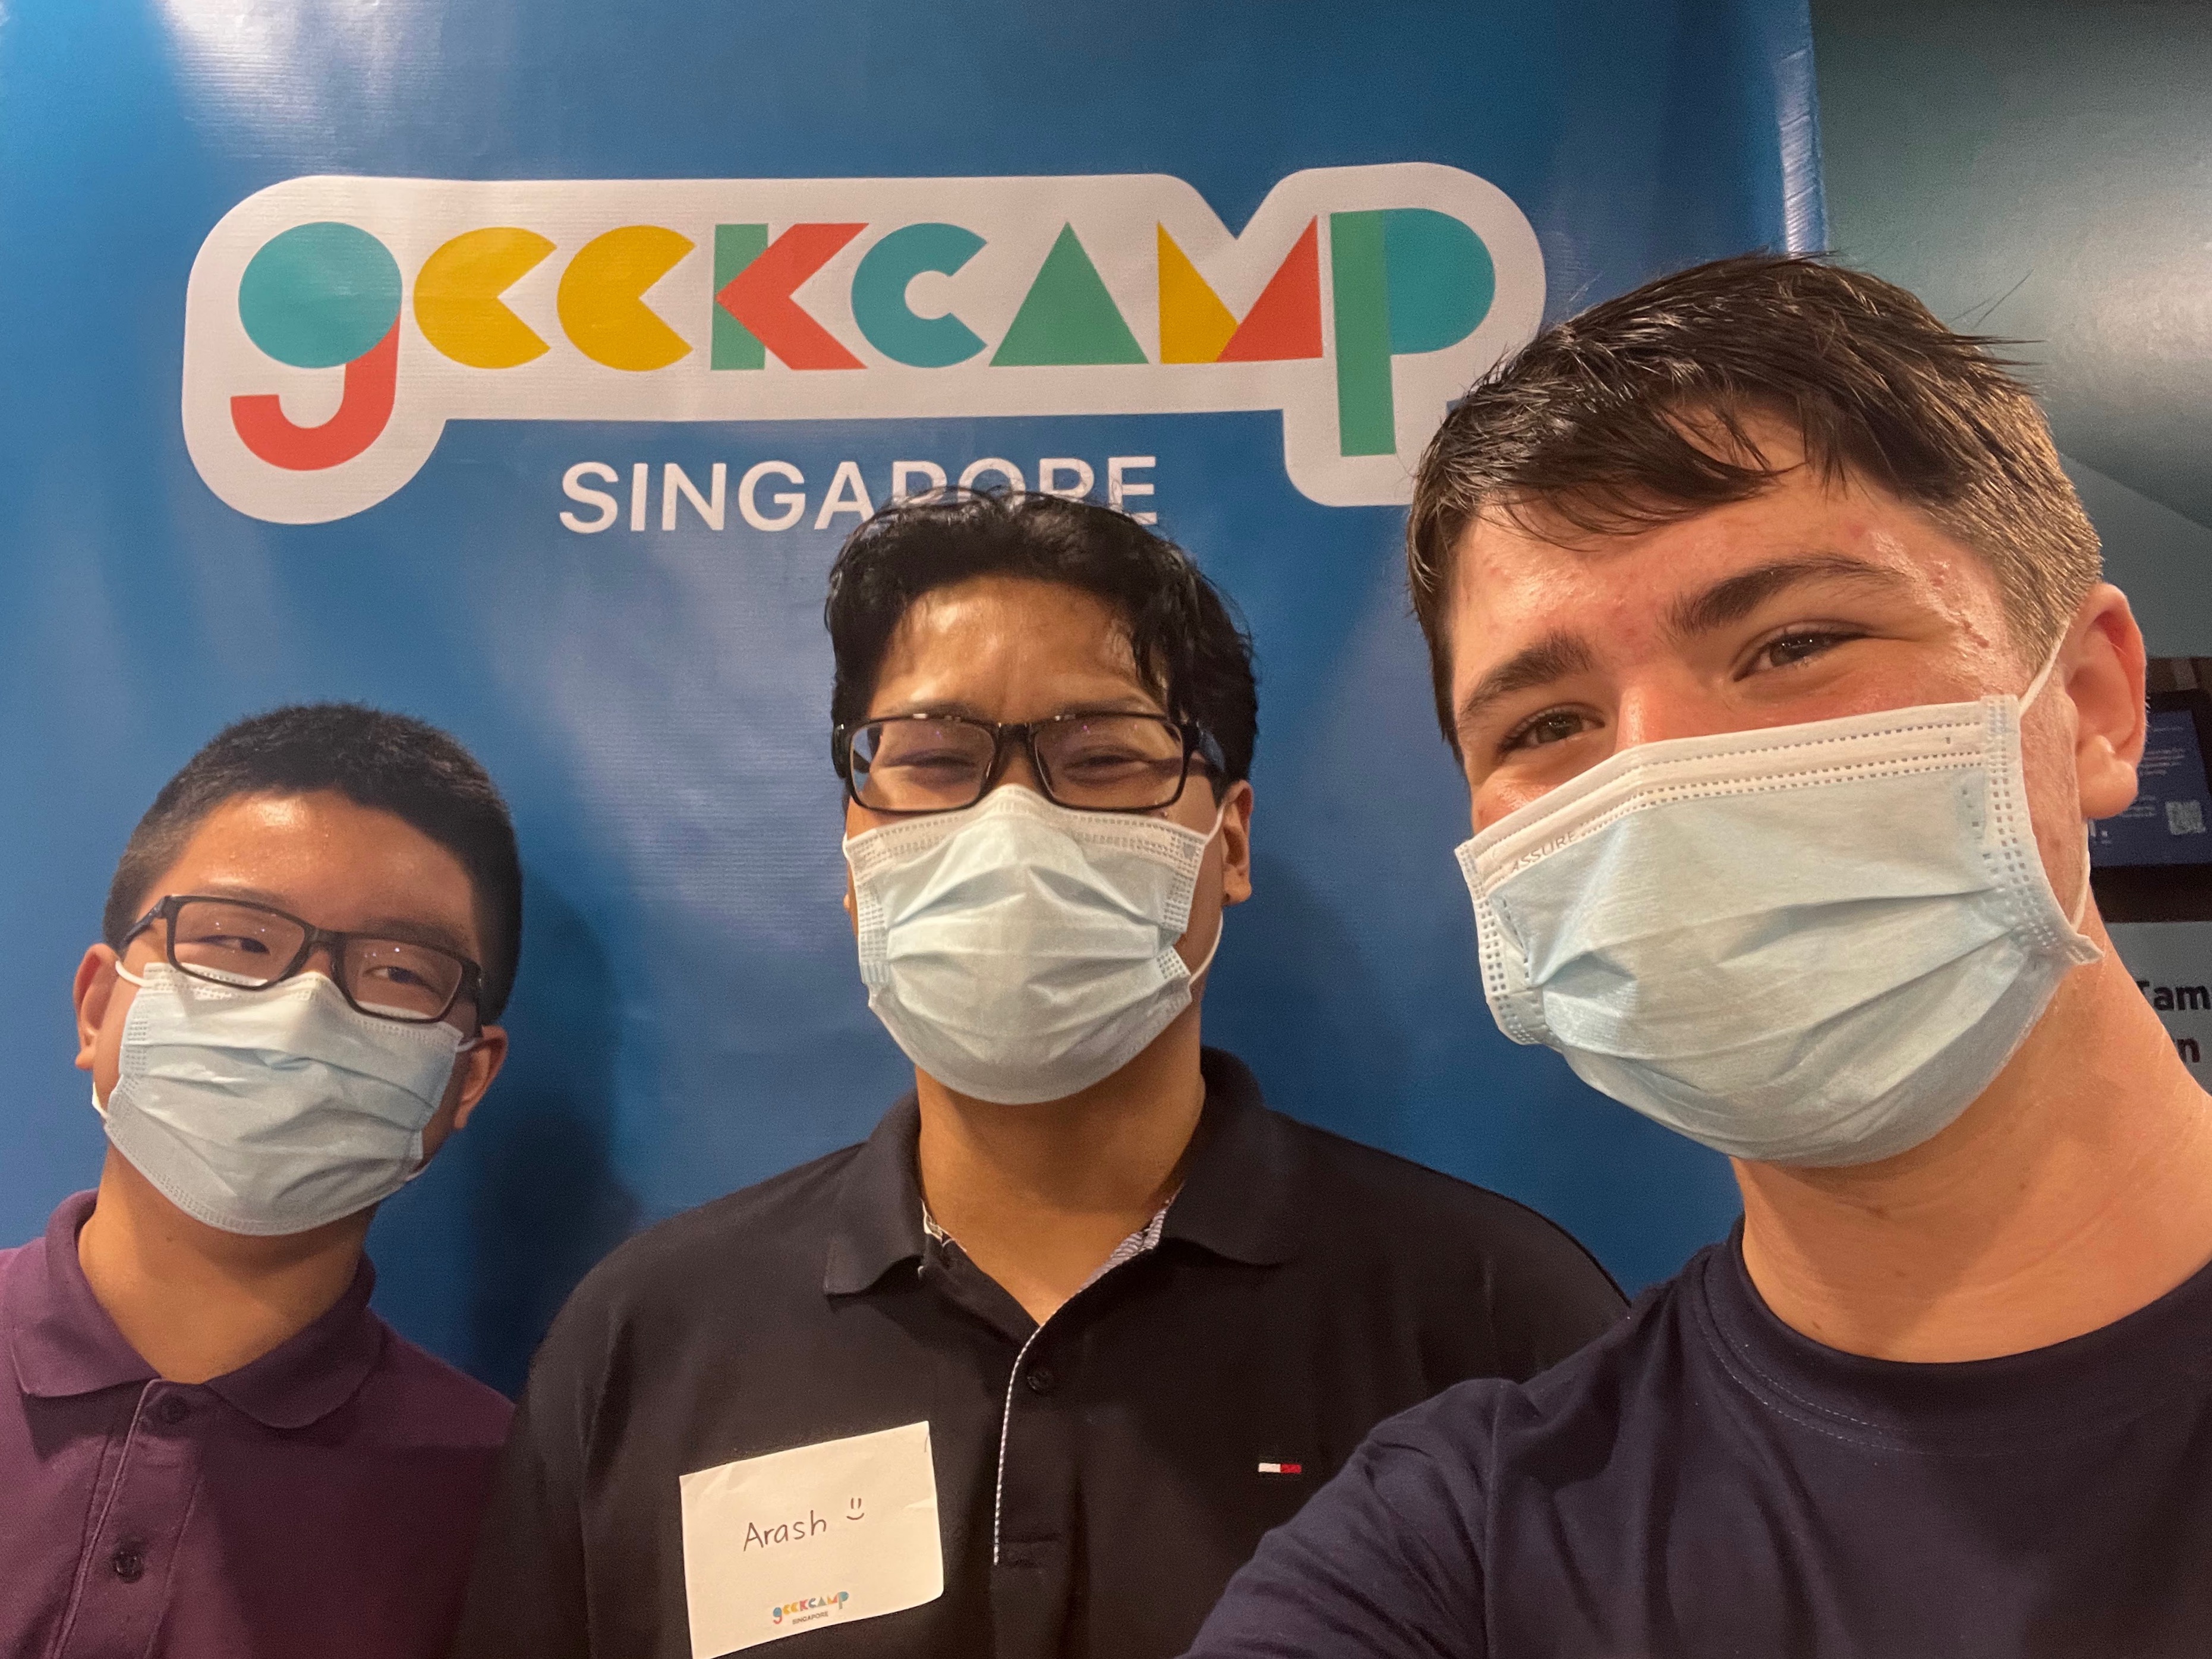 Three people smiling in front of a vertical banner with the words 'Geekcamp Singapore' on it